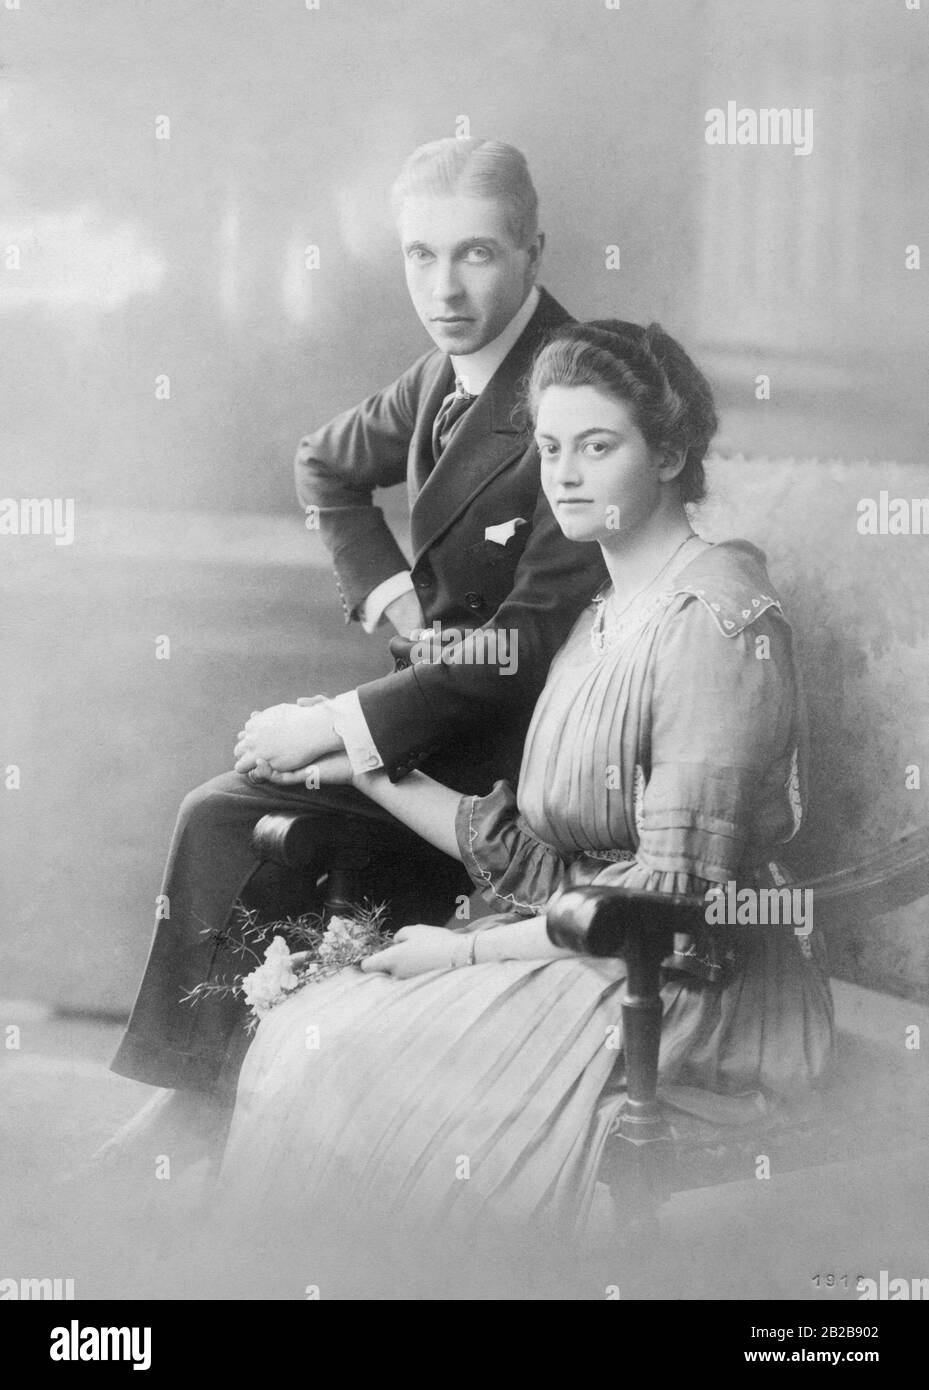 Prince Heinrich XXXIX Reuss zu Koestritz of the German aristocrat family Reuss married Antonia Emma Elisabeth, born Countess zu Castell-Castell, on August 7, 1918 in Castell in Lower Franconia. The prince was a member of the Prussian parliament and Prussian first lieutenant at the Viennese embassy. The picture shows their engagement photo. Stock Photo